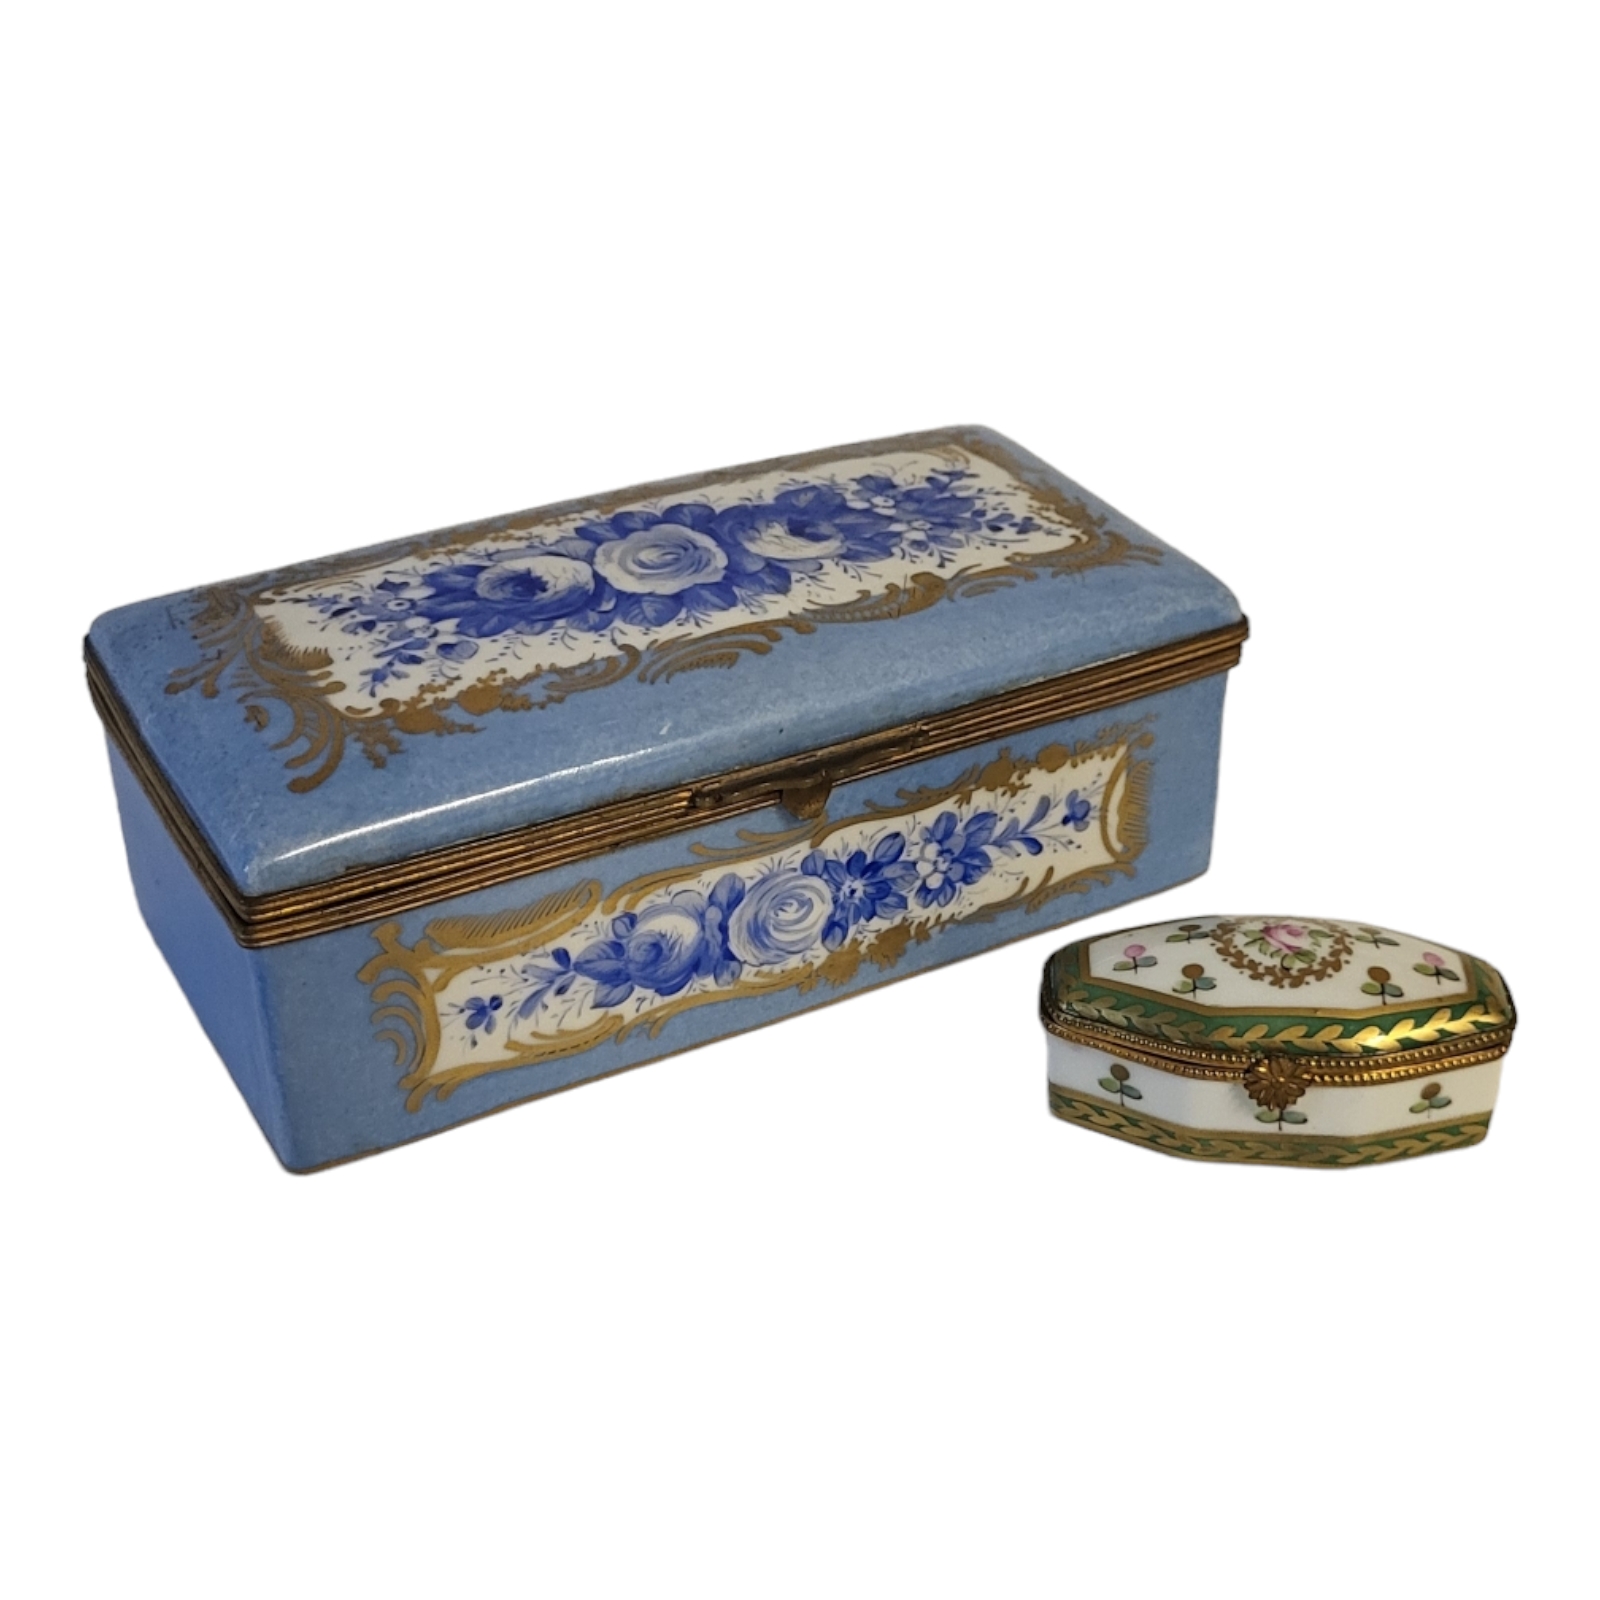 A 19TH CENTURY SEVRES STYLE HARD PASTE PORCELAIN CASKET AND COVER The exterior monochrome richly